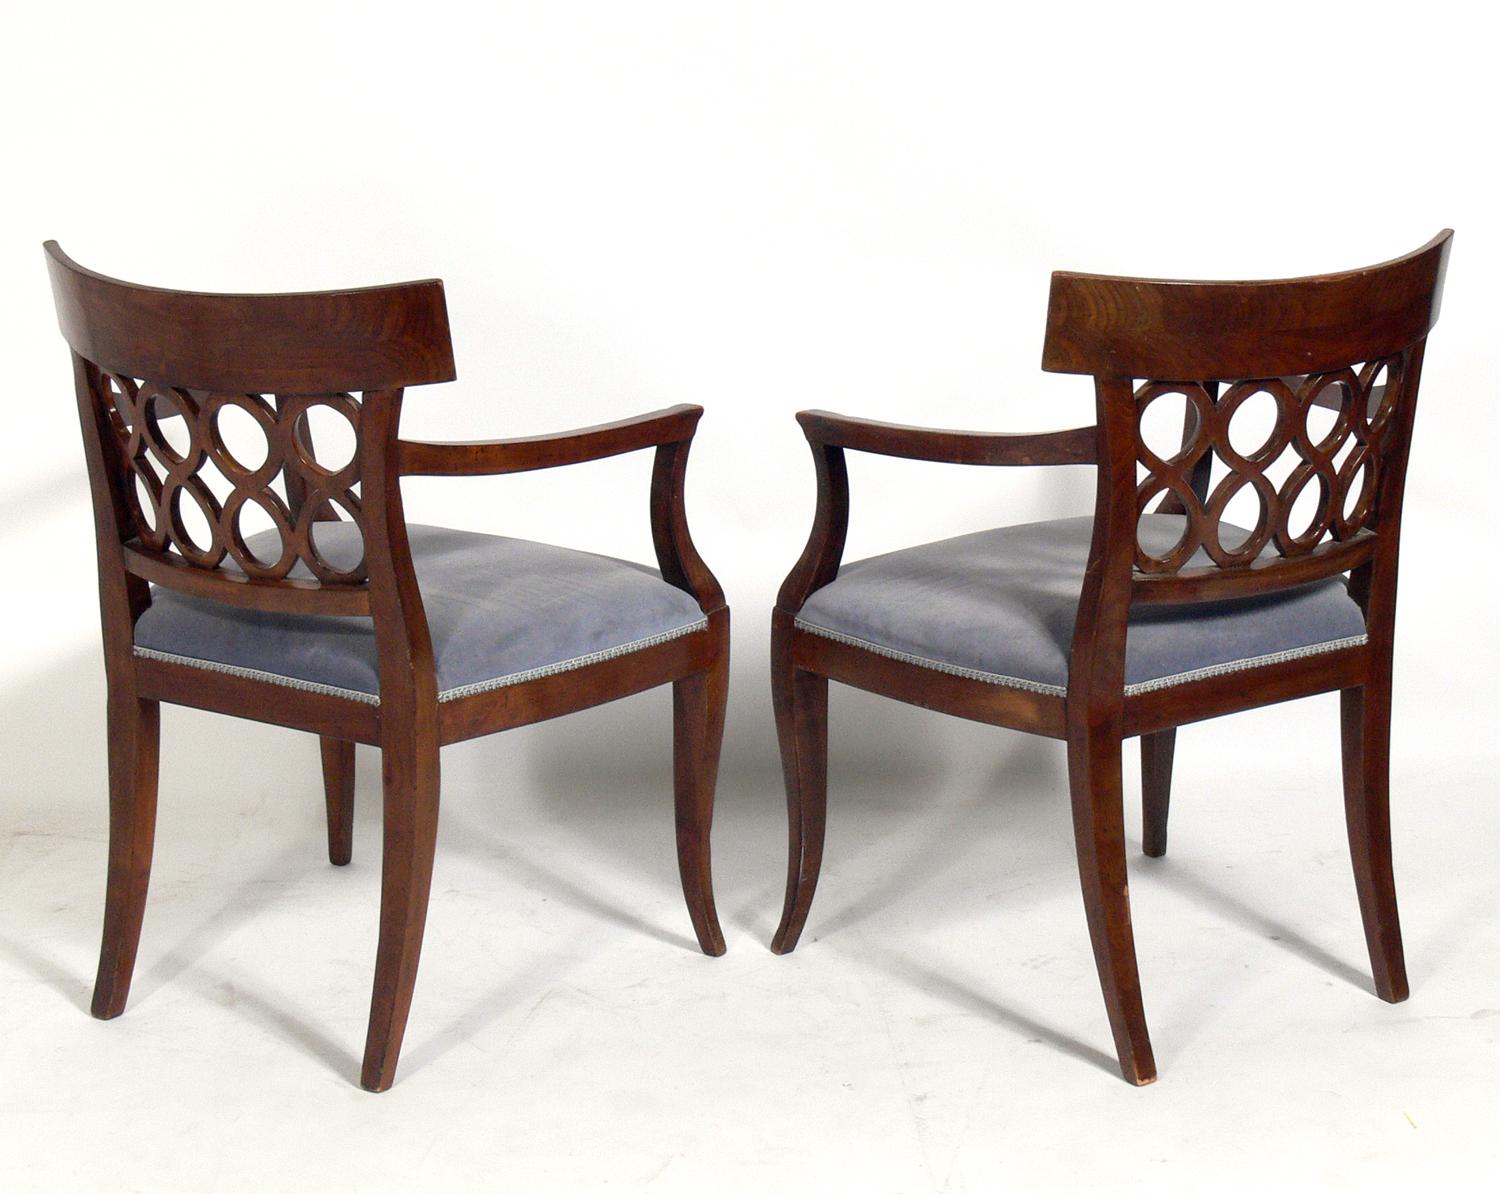 Pair of Curvaceous Italian Fret Back Chairs In Good Condition For Sale In Atlanta, GA